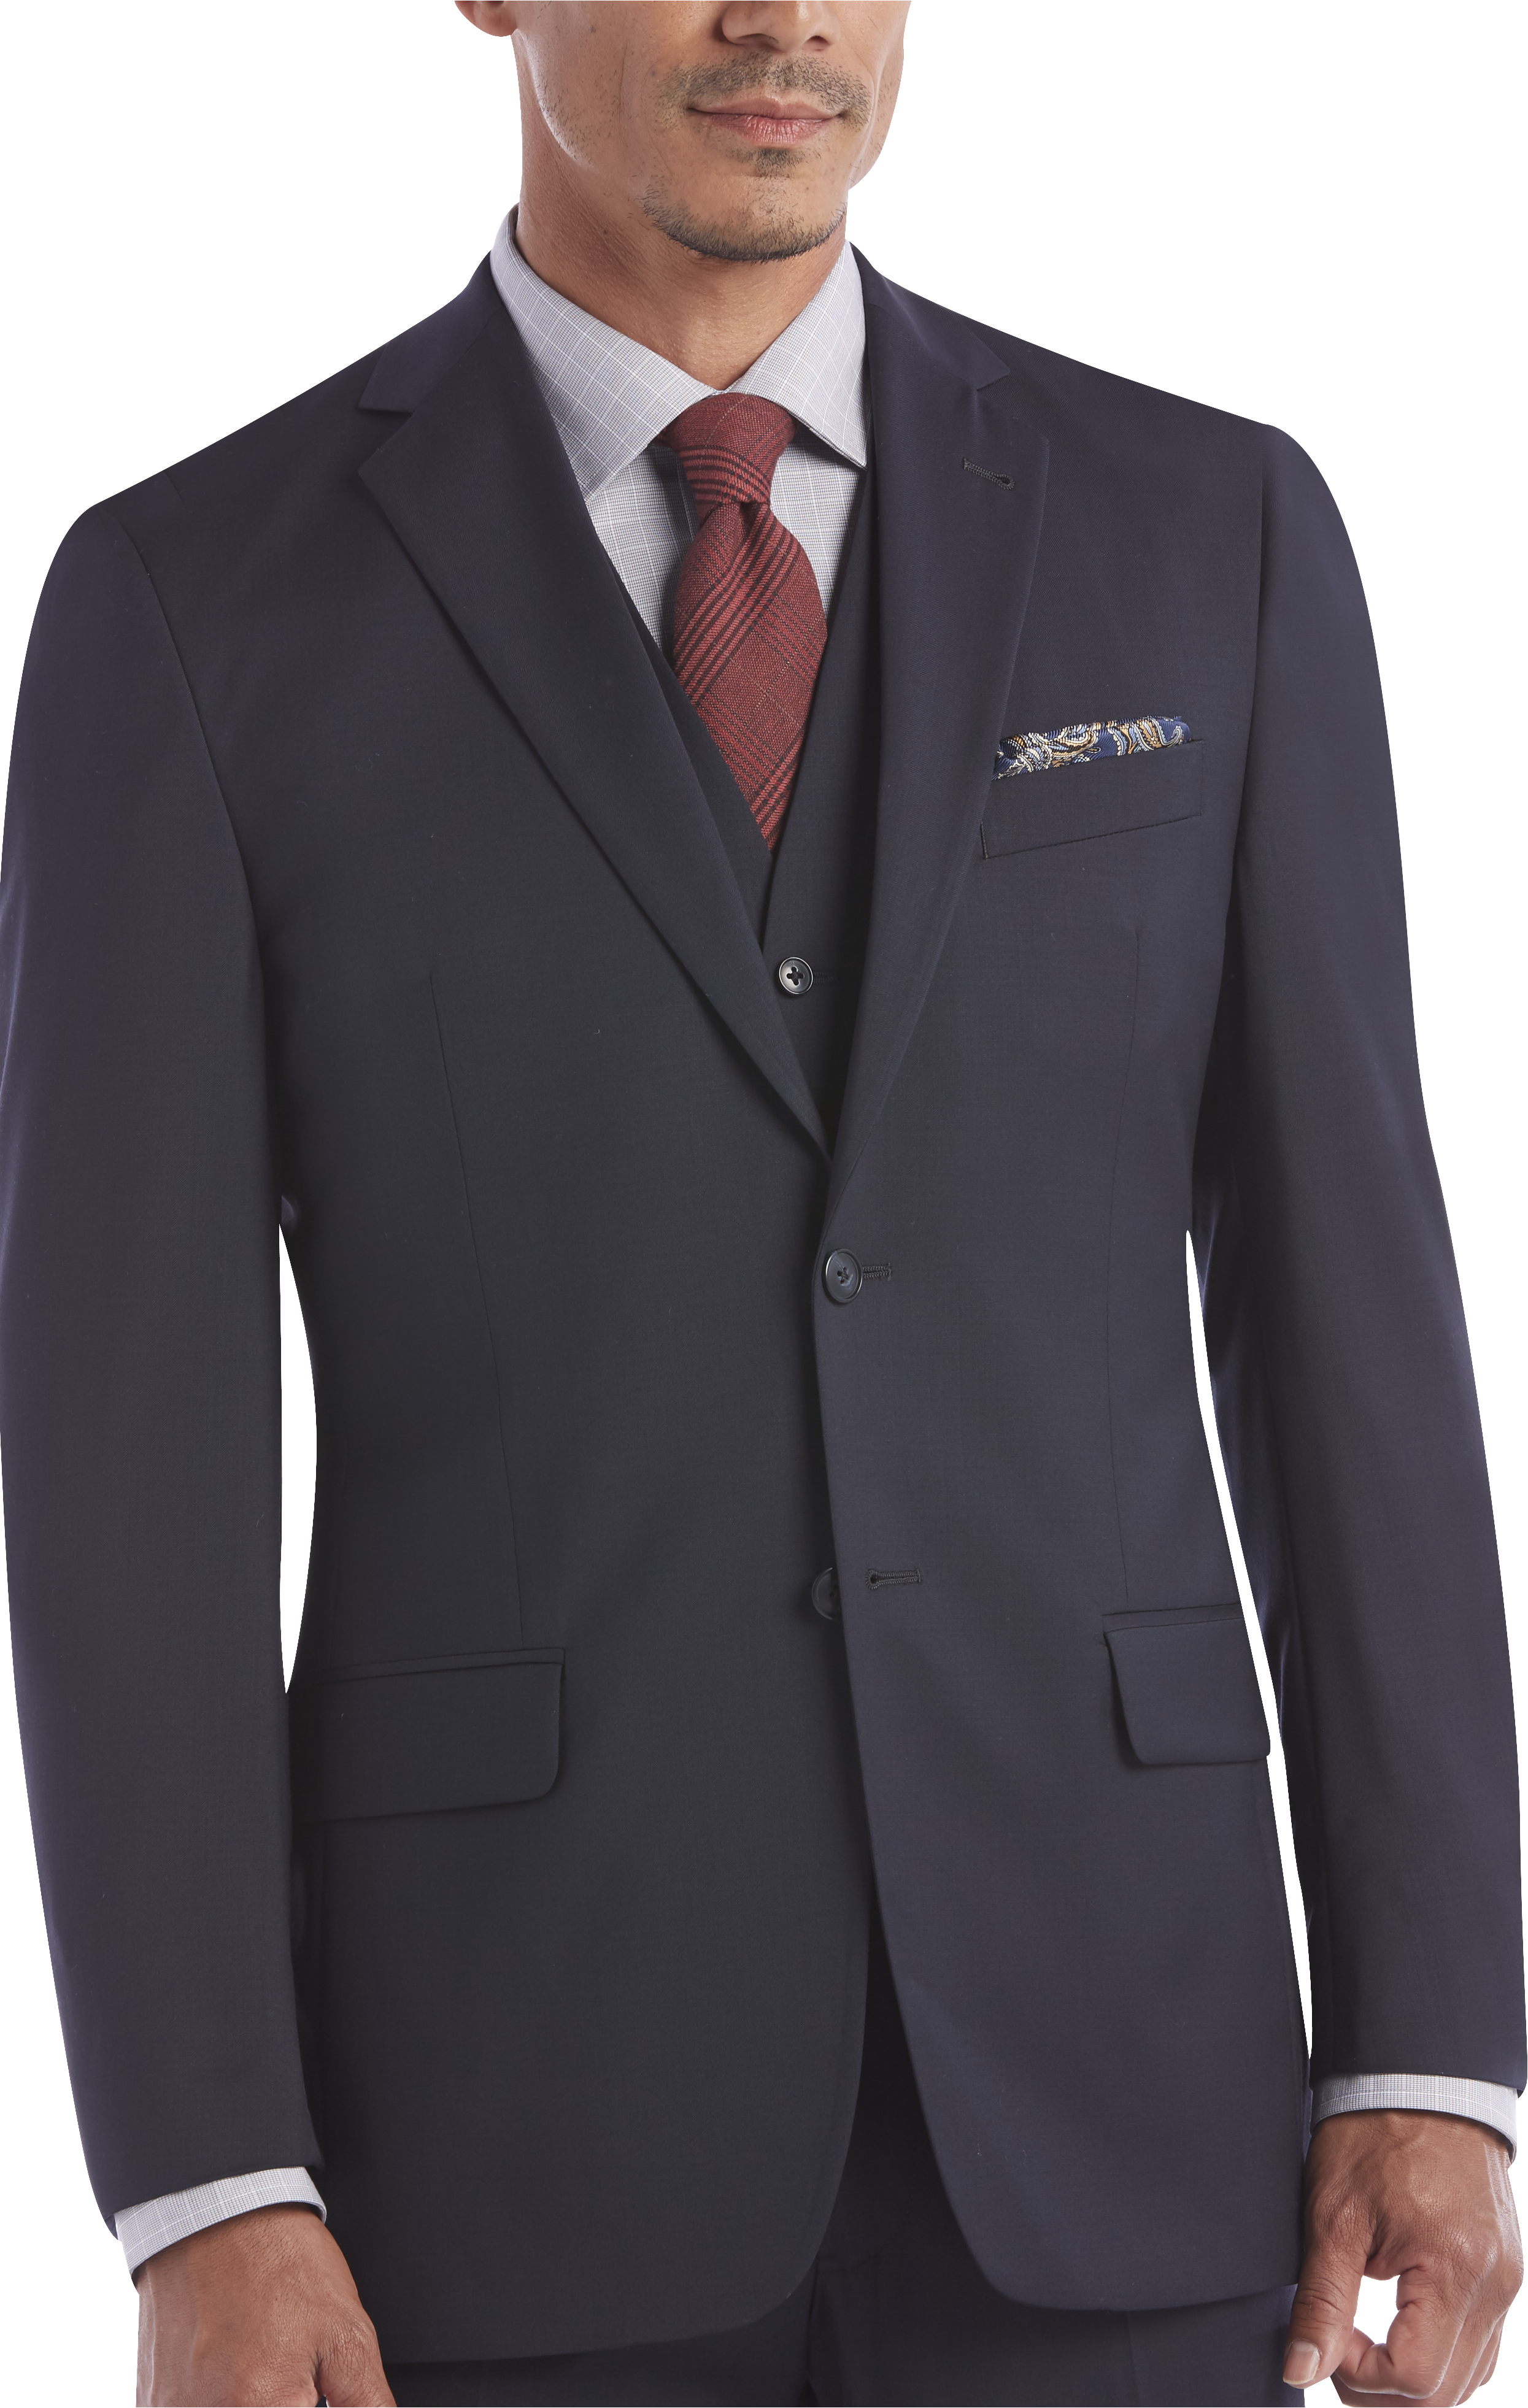 Big & Tall Portly Suits - Regal Fit Suits in XL | Men's Wearhouse